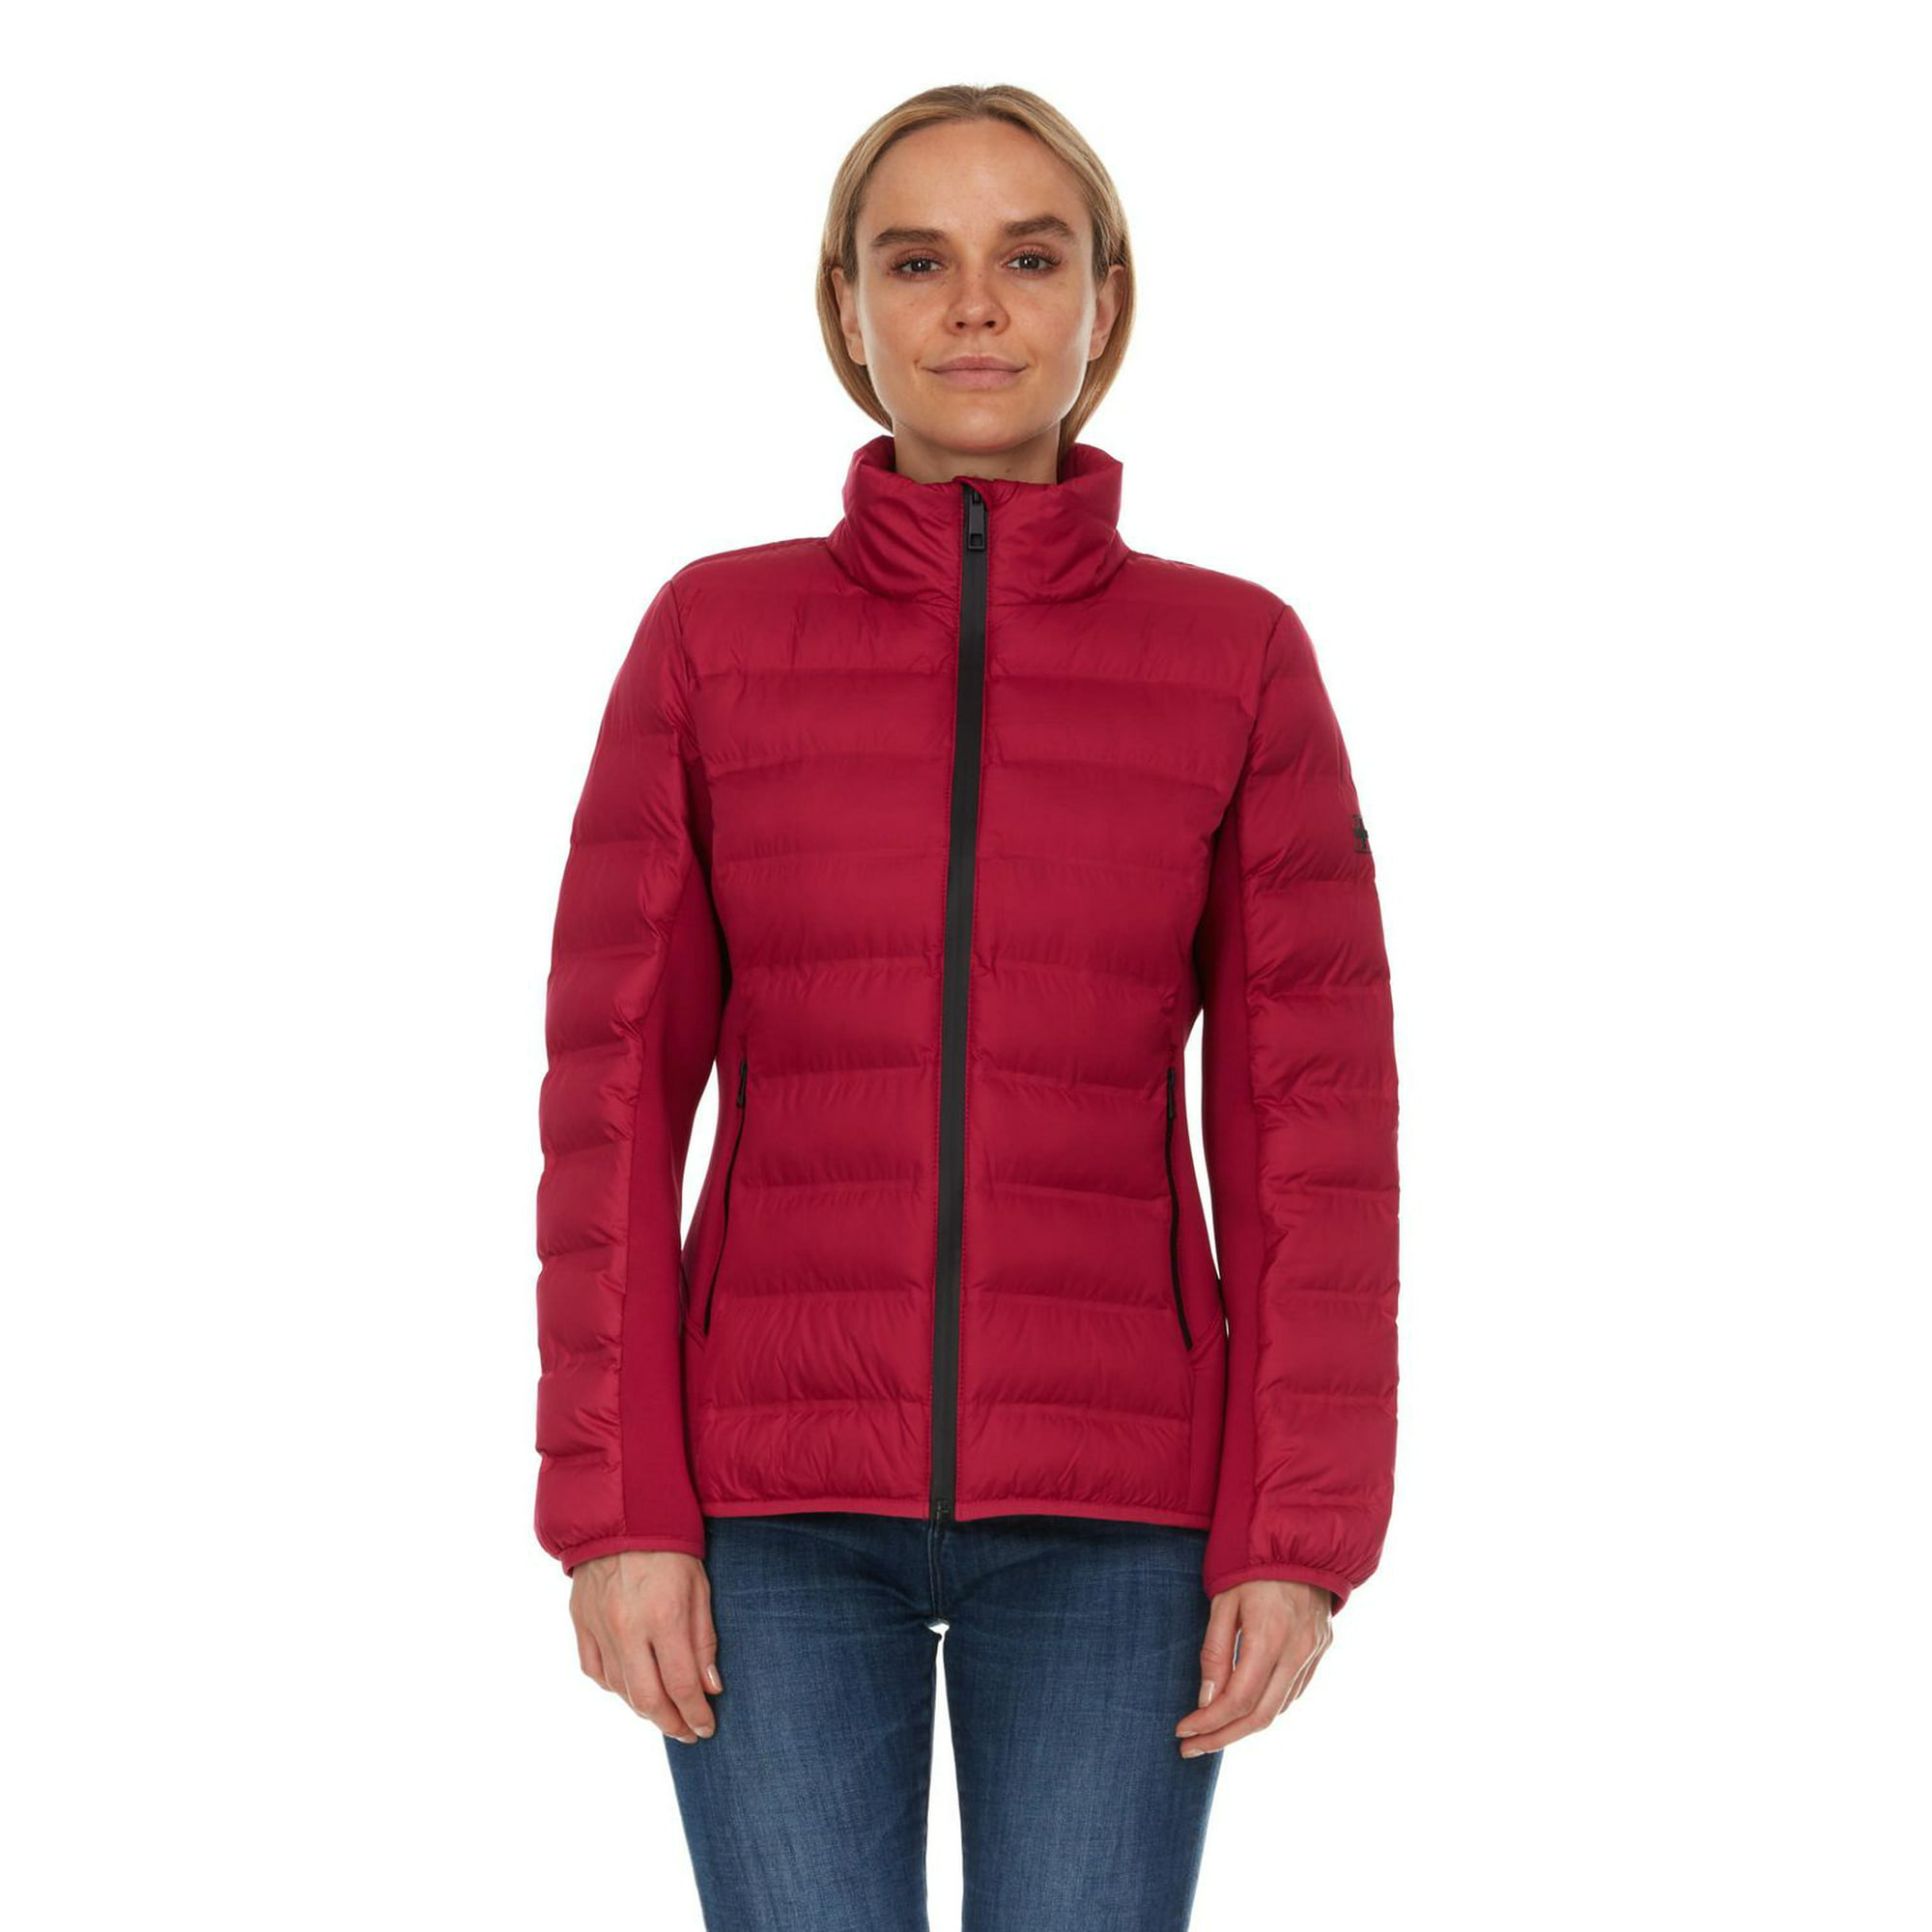 Swiss Tech Women's Quilted Mixed Media Jacket 